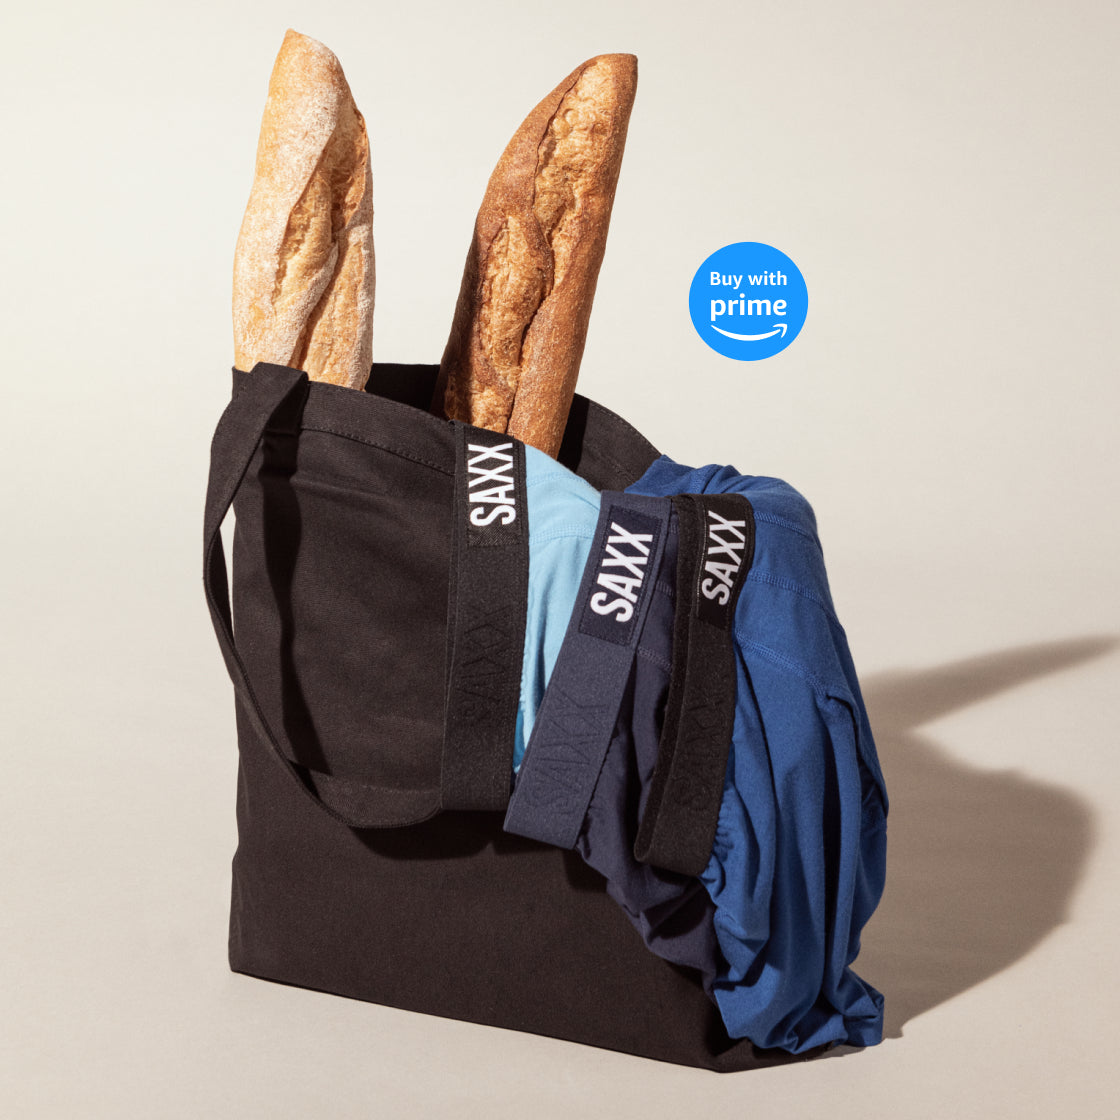 A black cloth bag holding two baguettes and three pairs of boxer briefs in different shades of blue